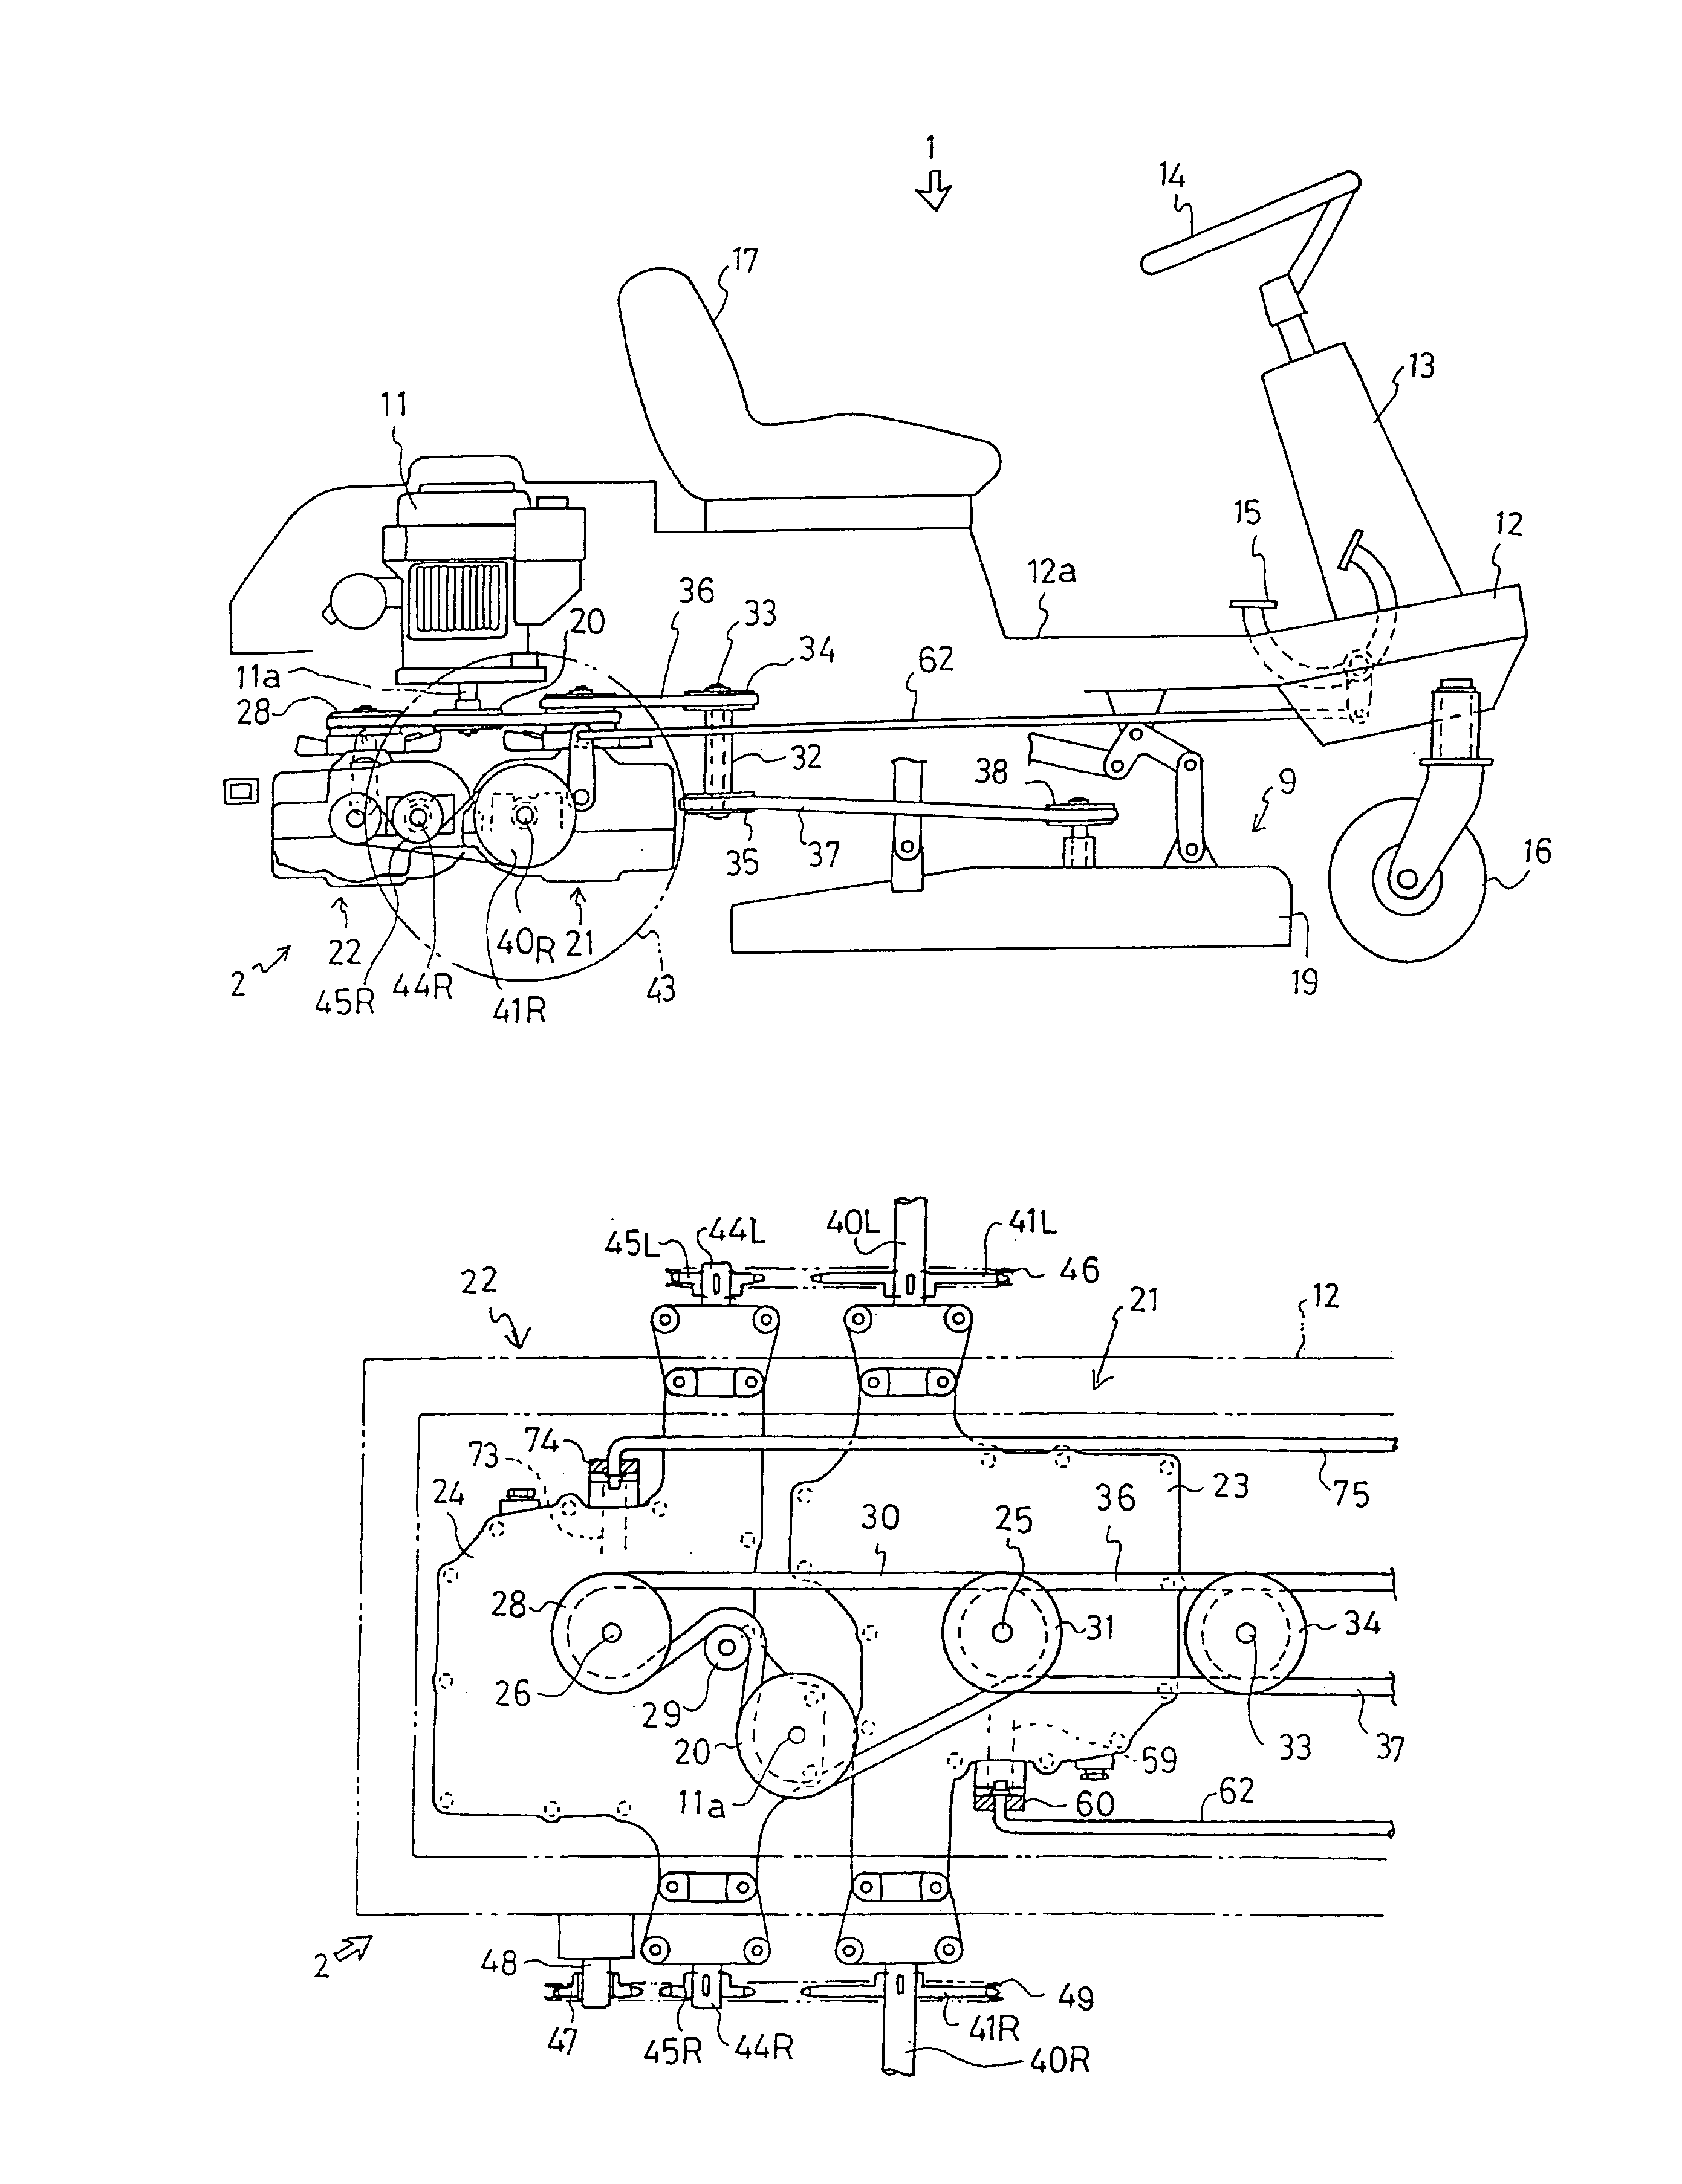 Driving apparatus for speed changing and steering of a vehicle